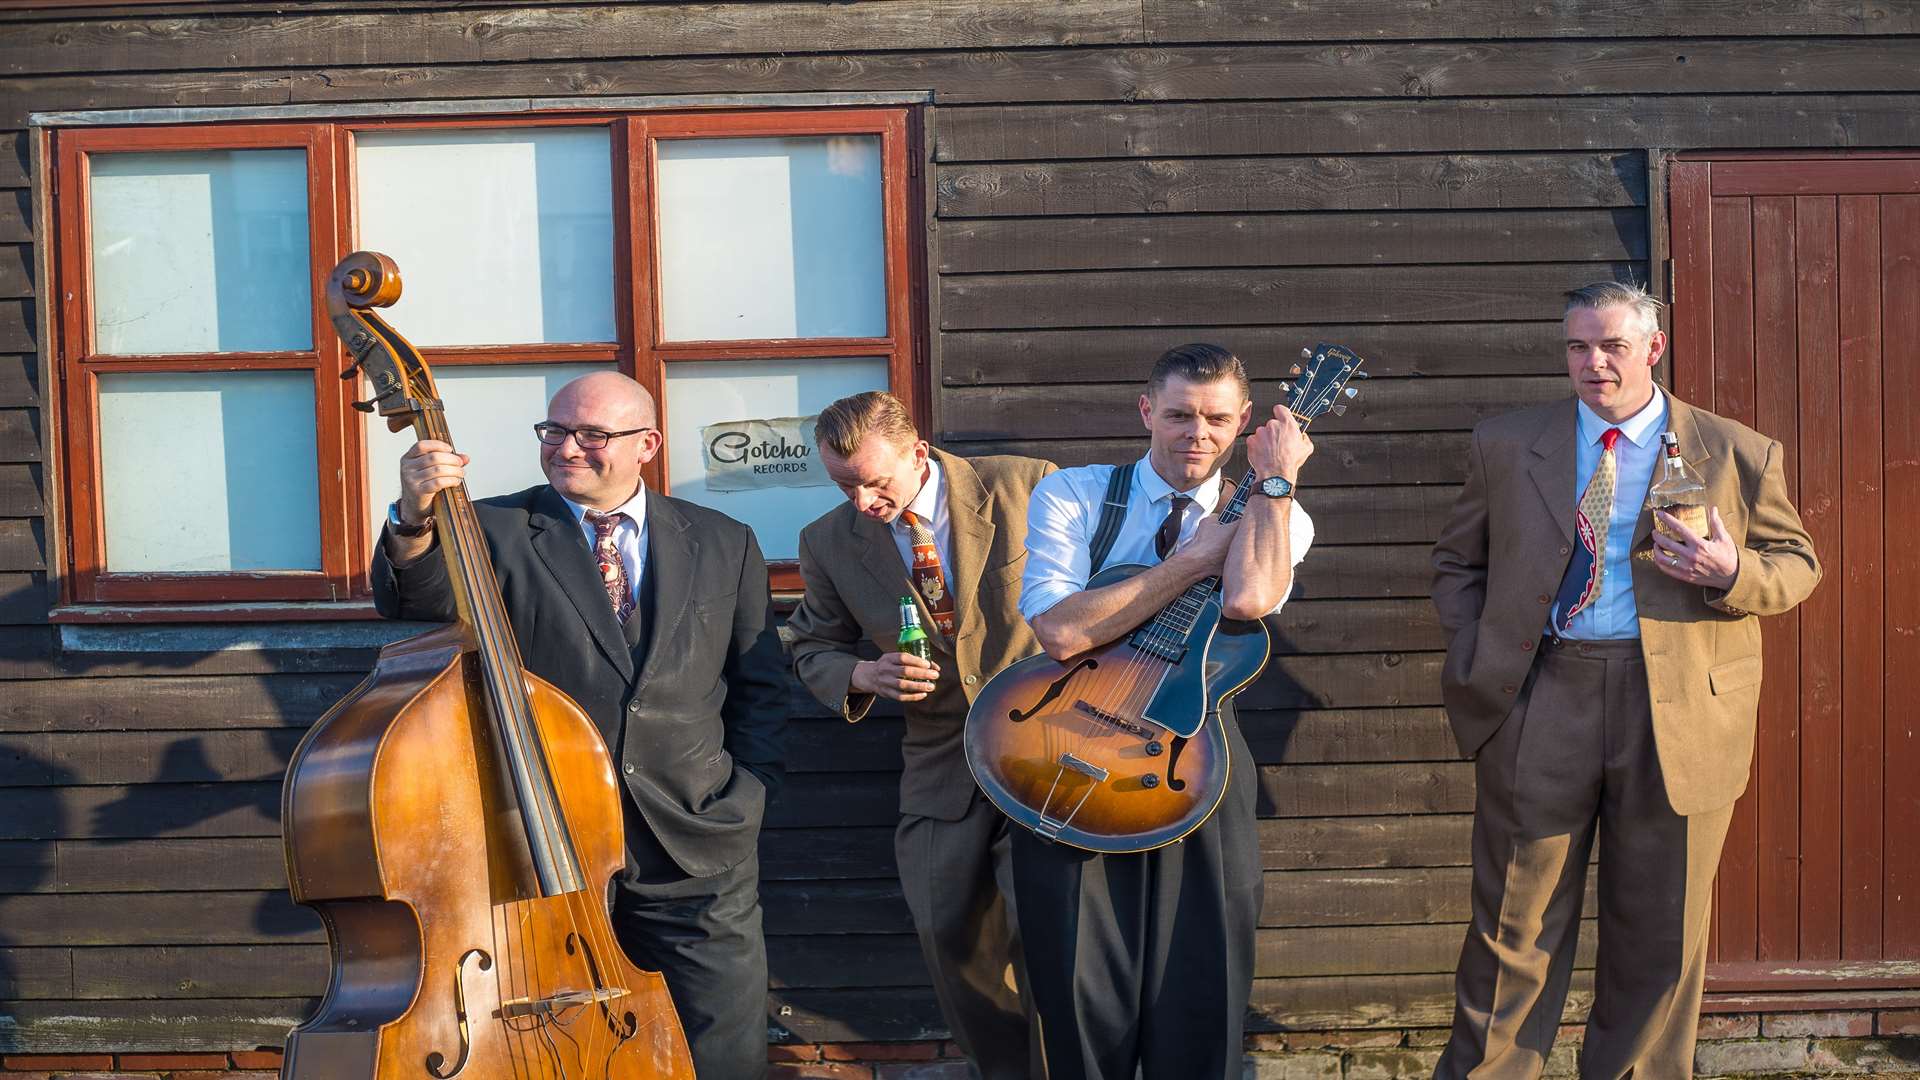 The Devil's Cut Combo, which includes Rev Paul Kish on double bass, will be at Yalding's Vicar's Picnic